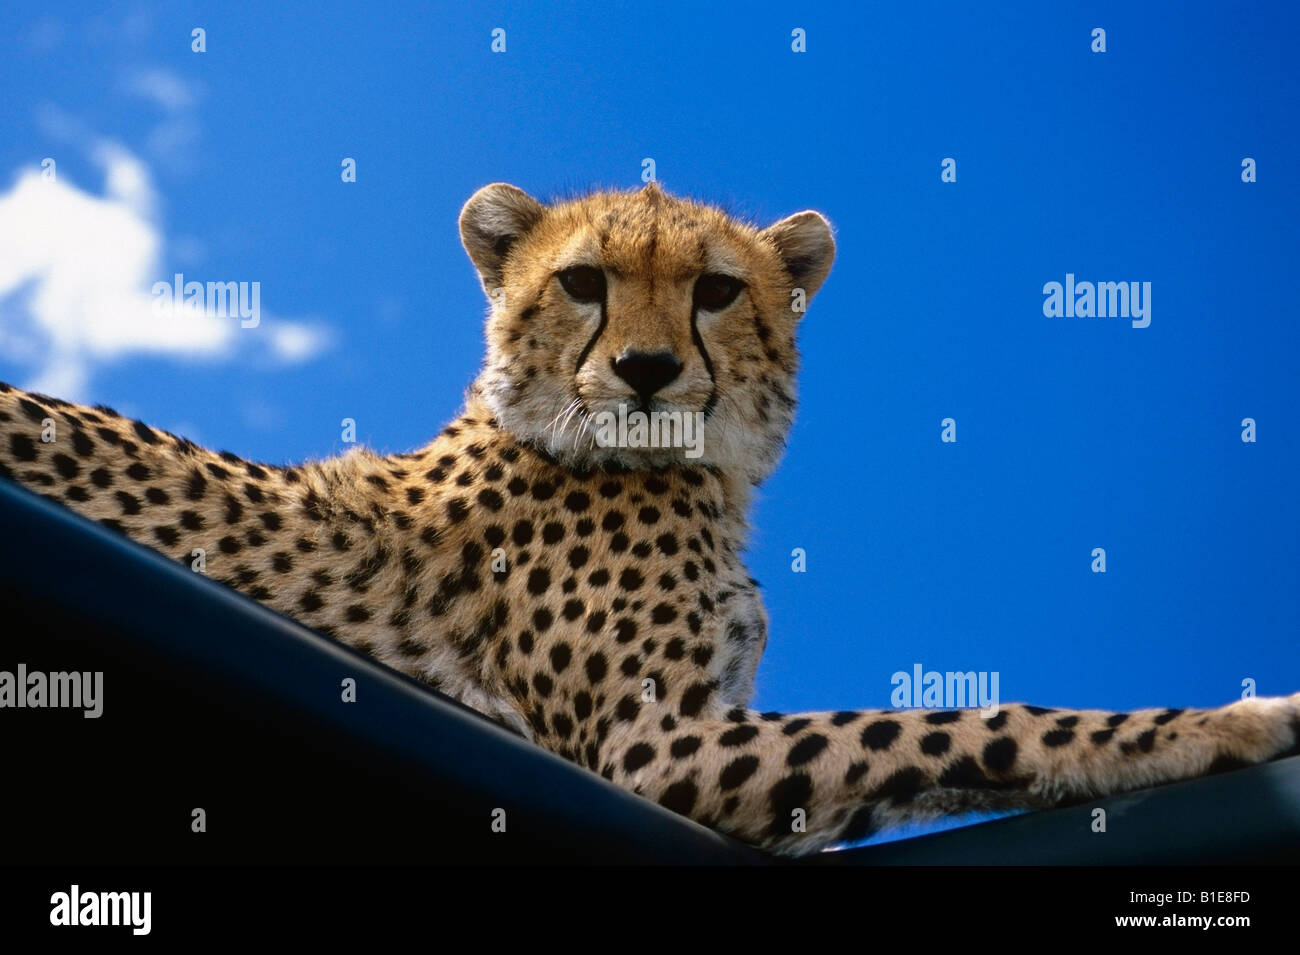 Cheetah laying on the roof of a vehicle Africa Stock Photo